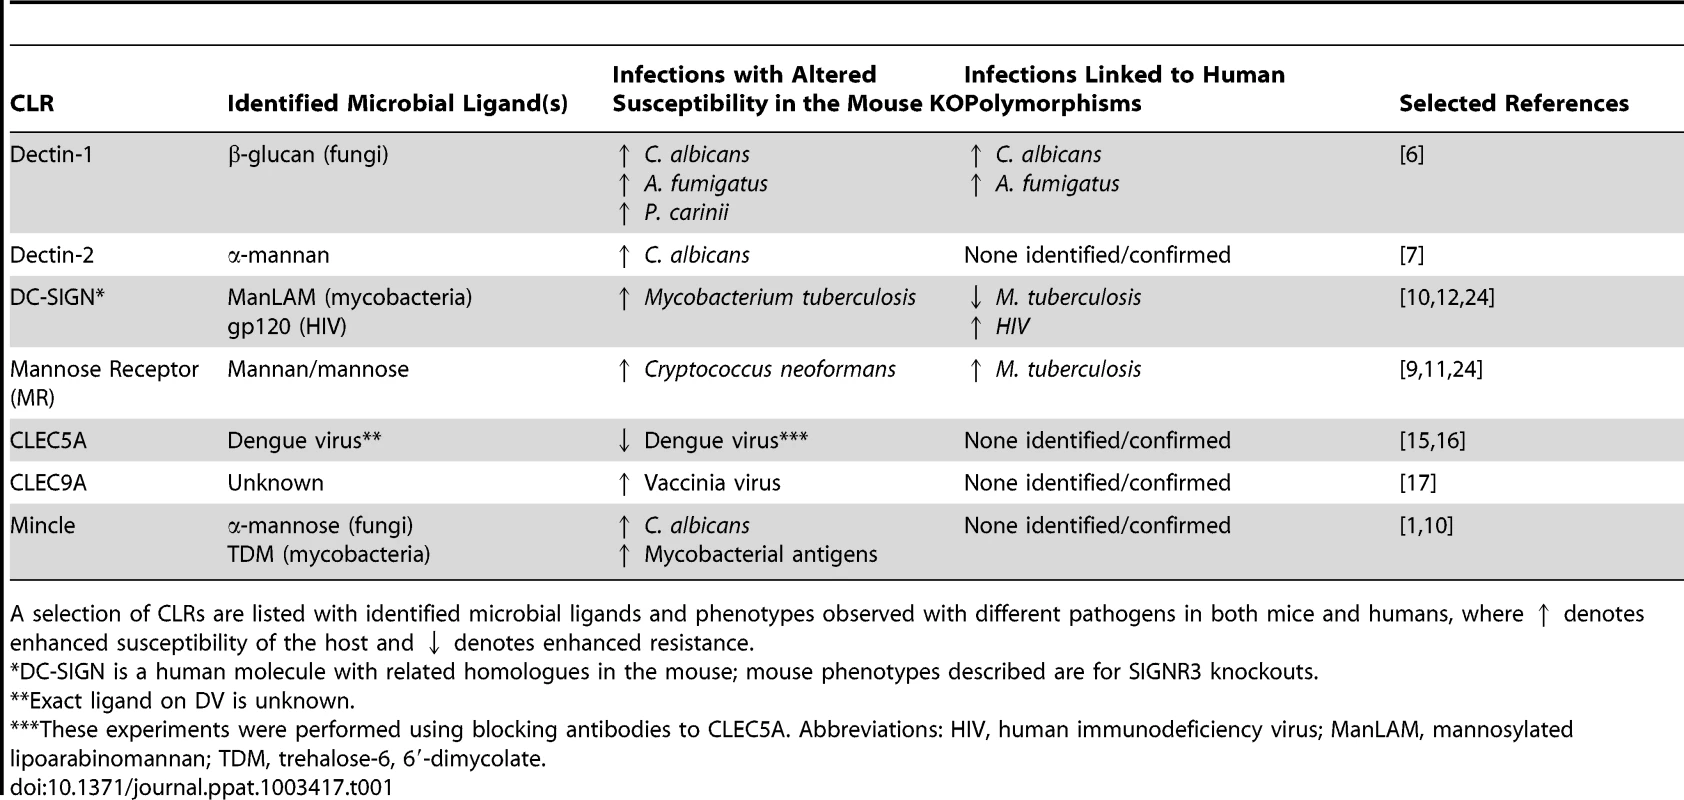 Selected CLRs, their microbial ligands, and the microbes that have altered ability to infect in the absence of the receptor within mice and humans.